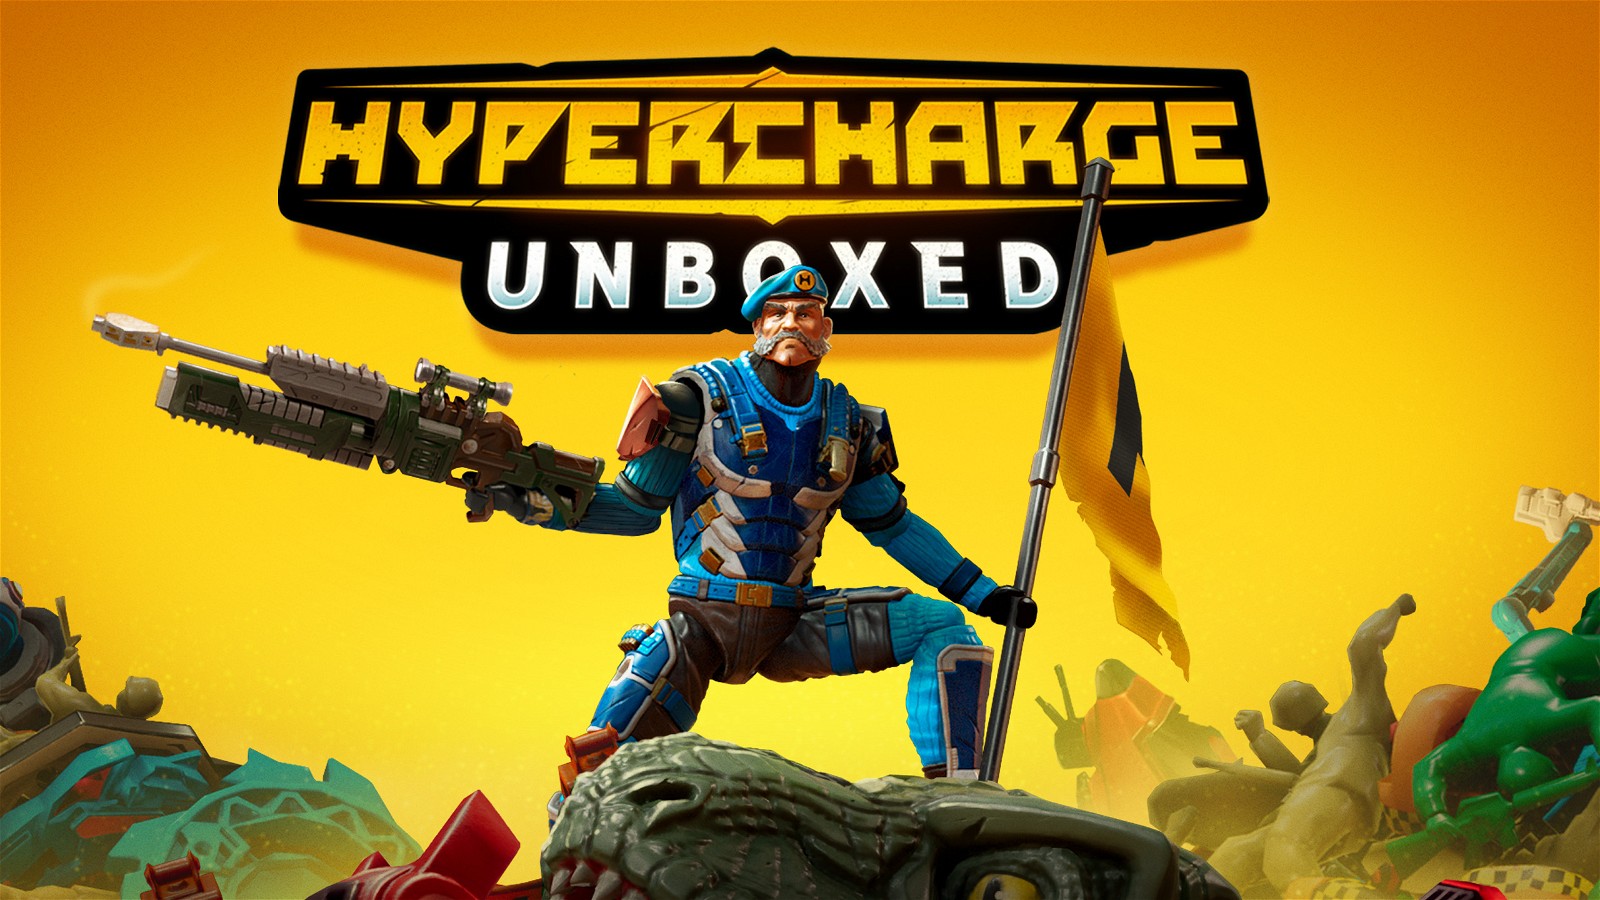 Hypercharge: Unboxed has crossed over 40k sales in 4 days. 